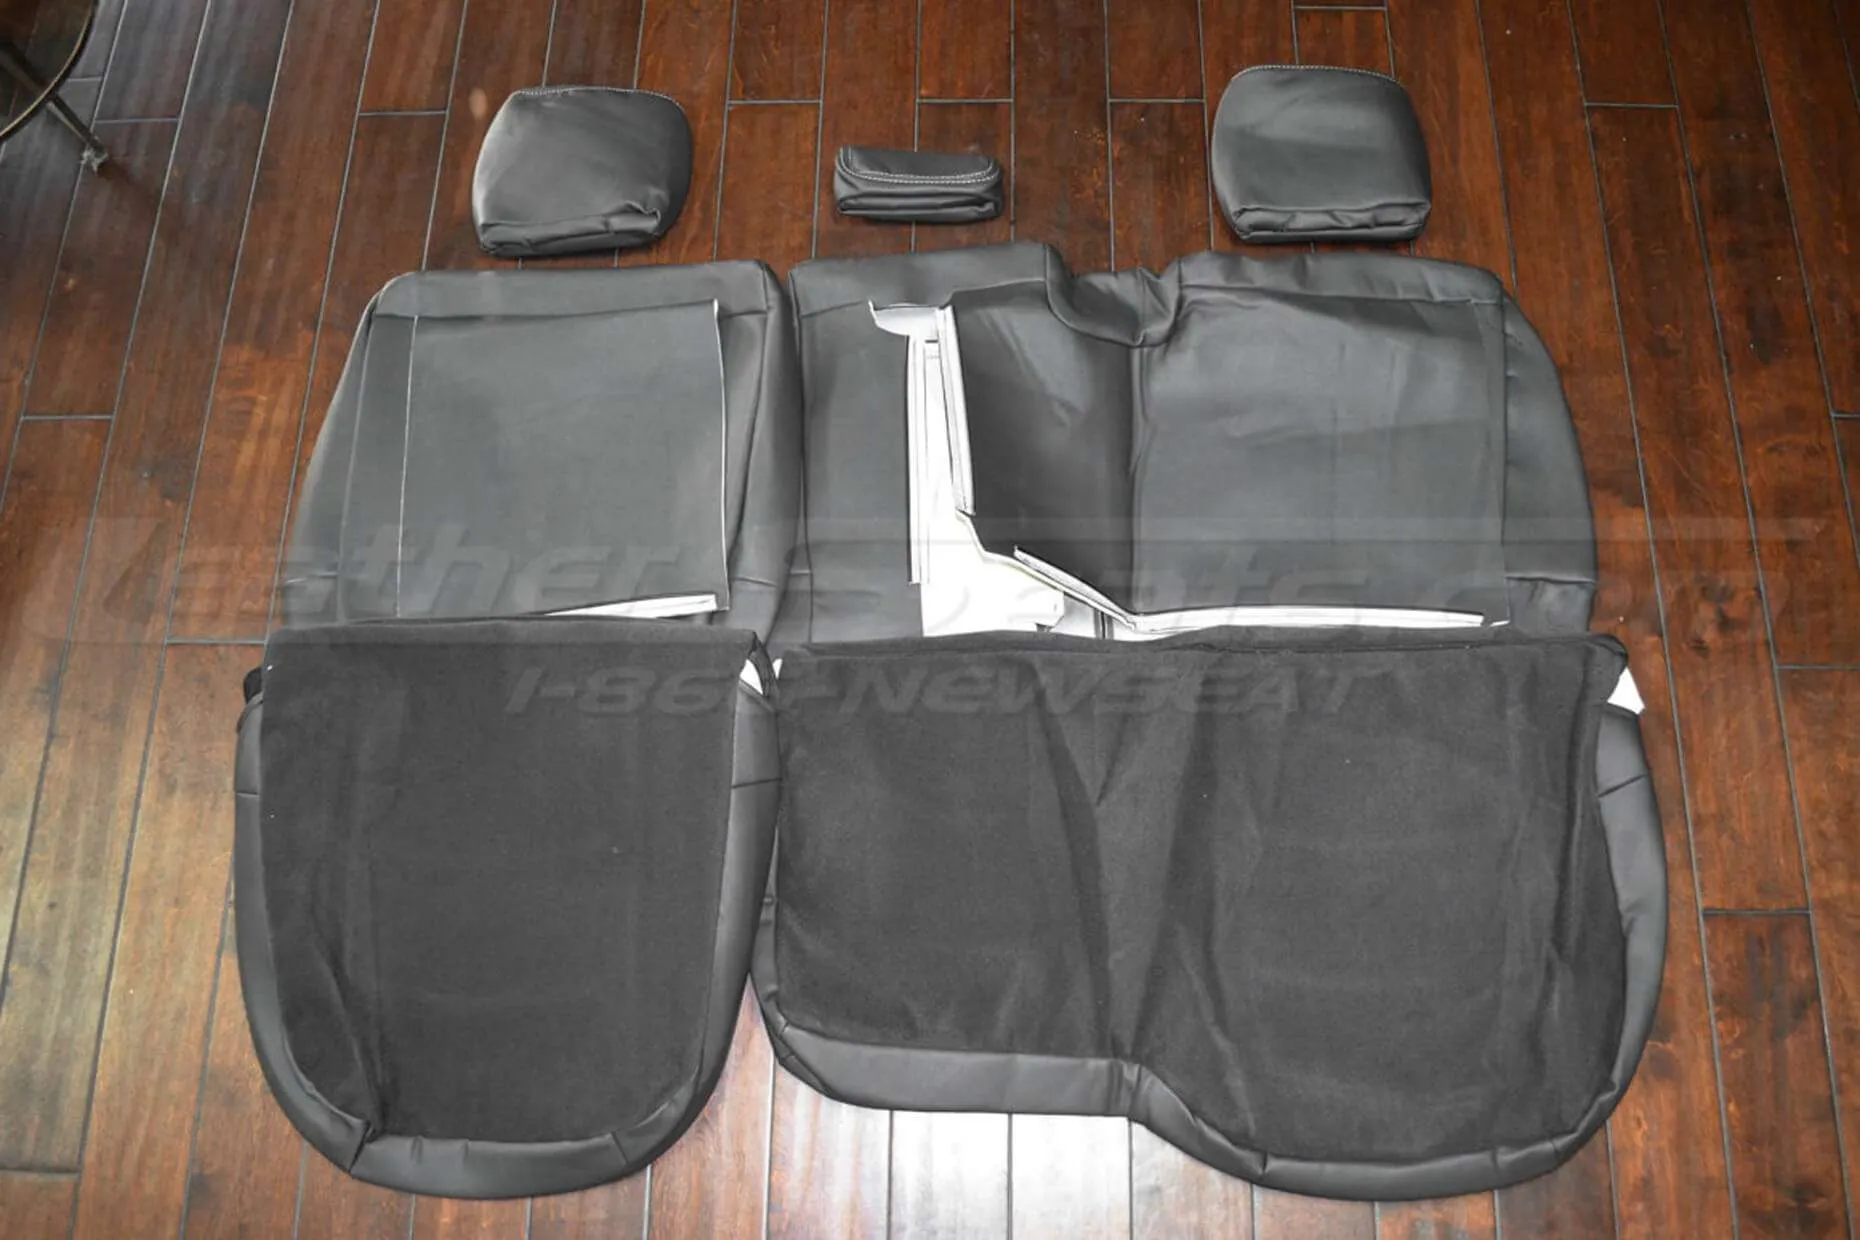 Back view of rear seats